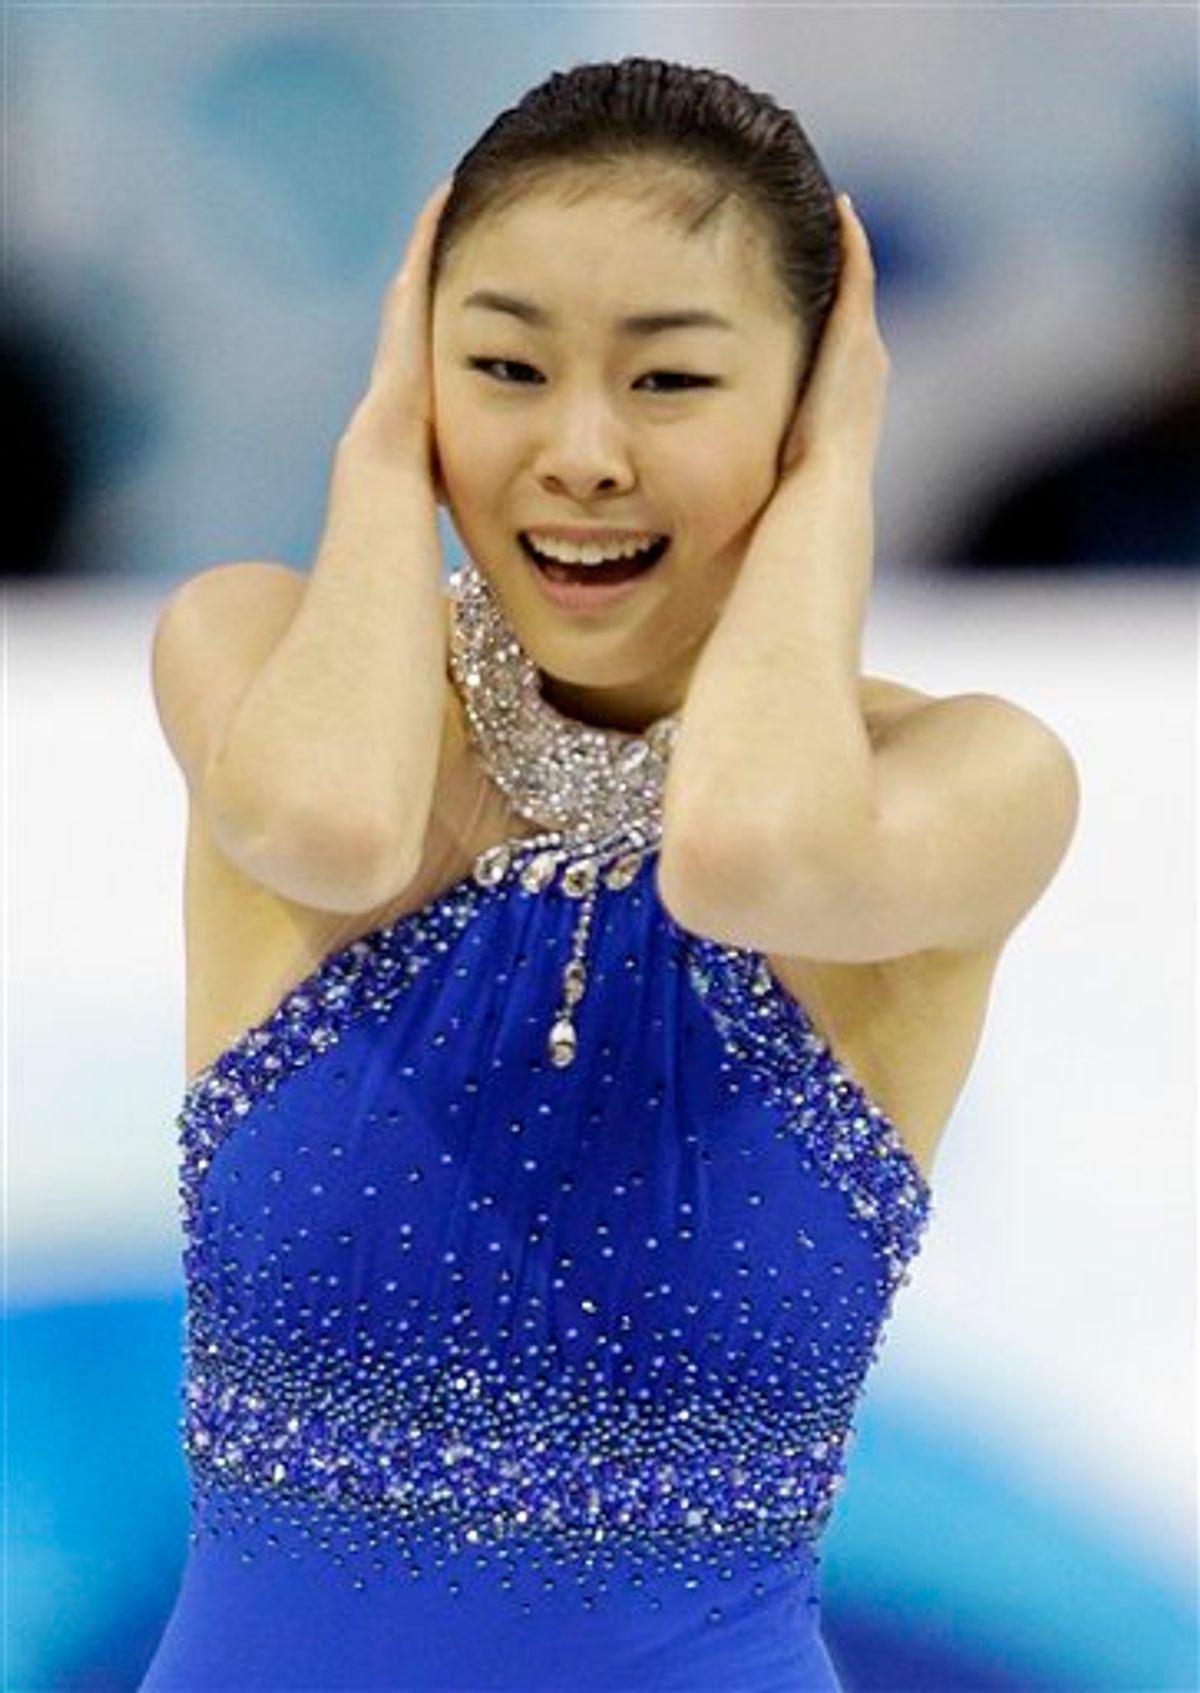 South Korea's Kim Yu-Na reacts after performing her free program during the women's figure skating competition at the Vancouver 2010 Olympics in Vancouver, British Columbia, Thursday, Feb. 25, 2010. (AP Photo/David J. Phillip) (AP)